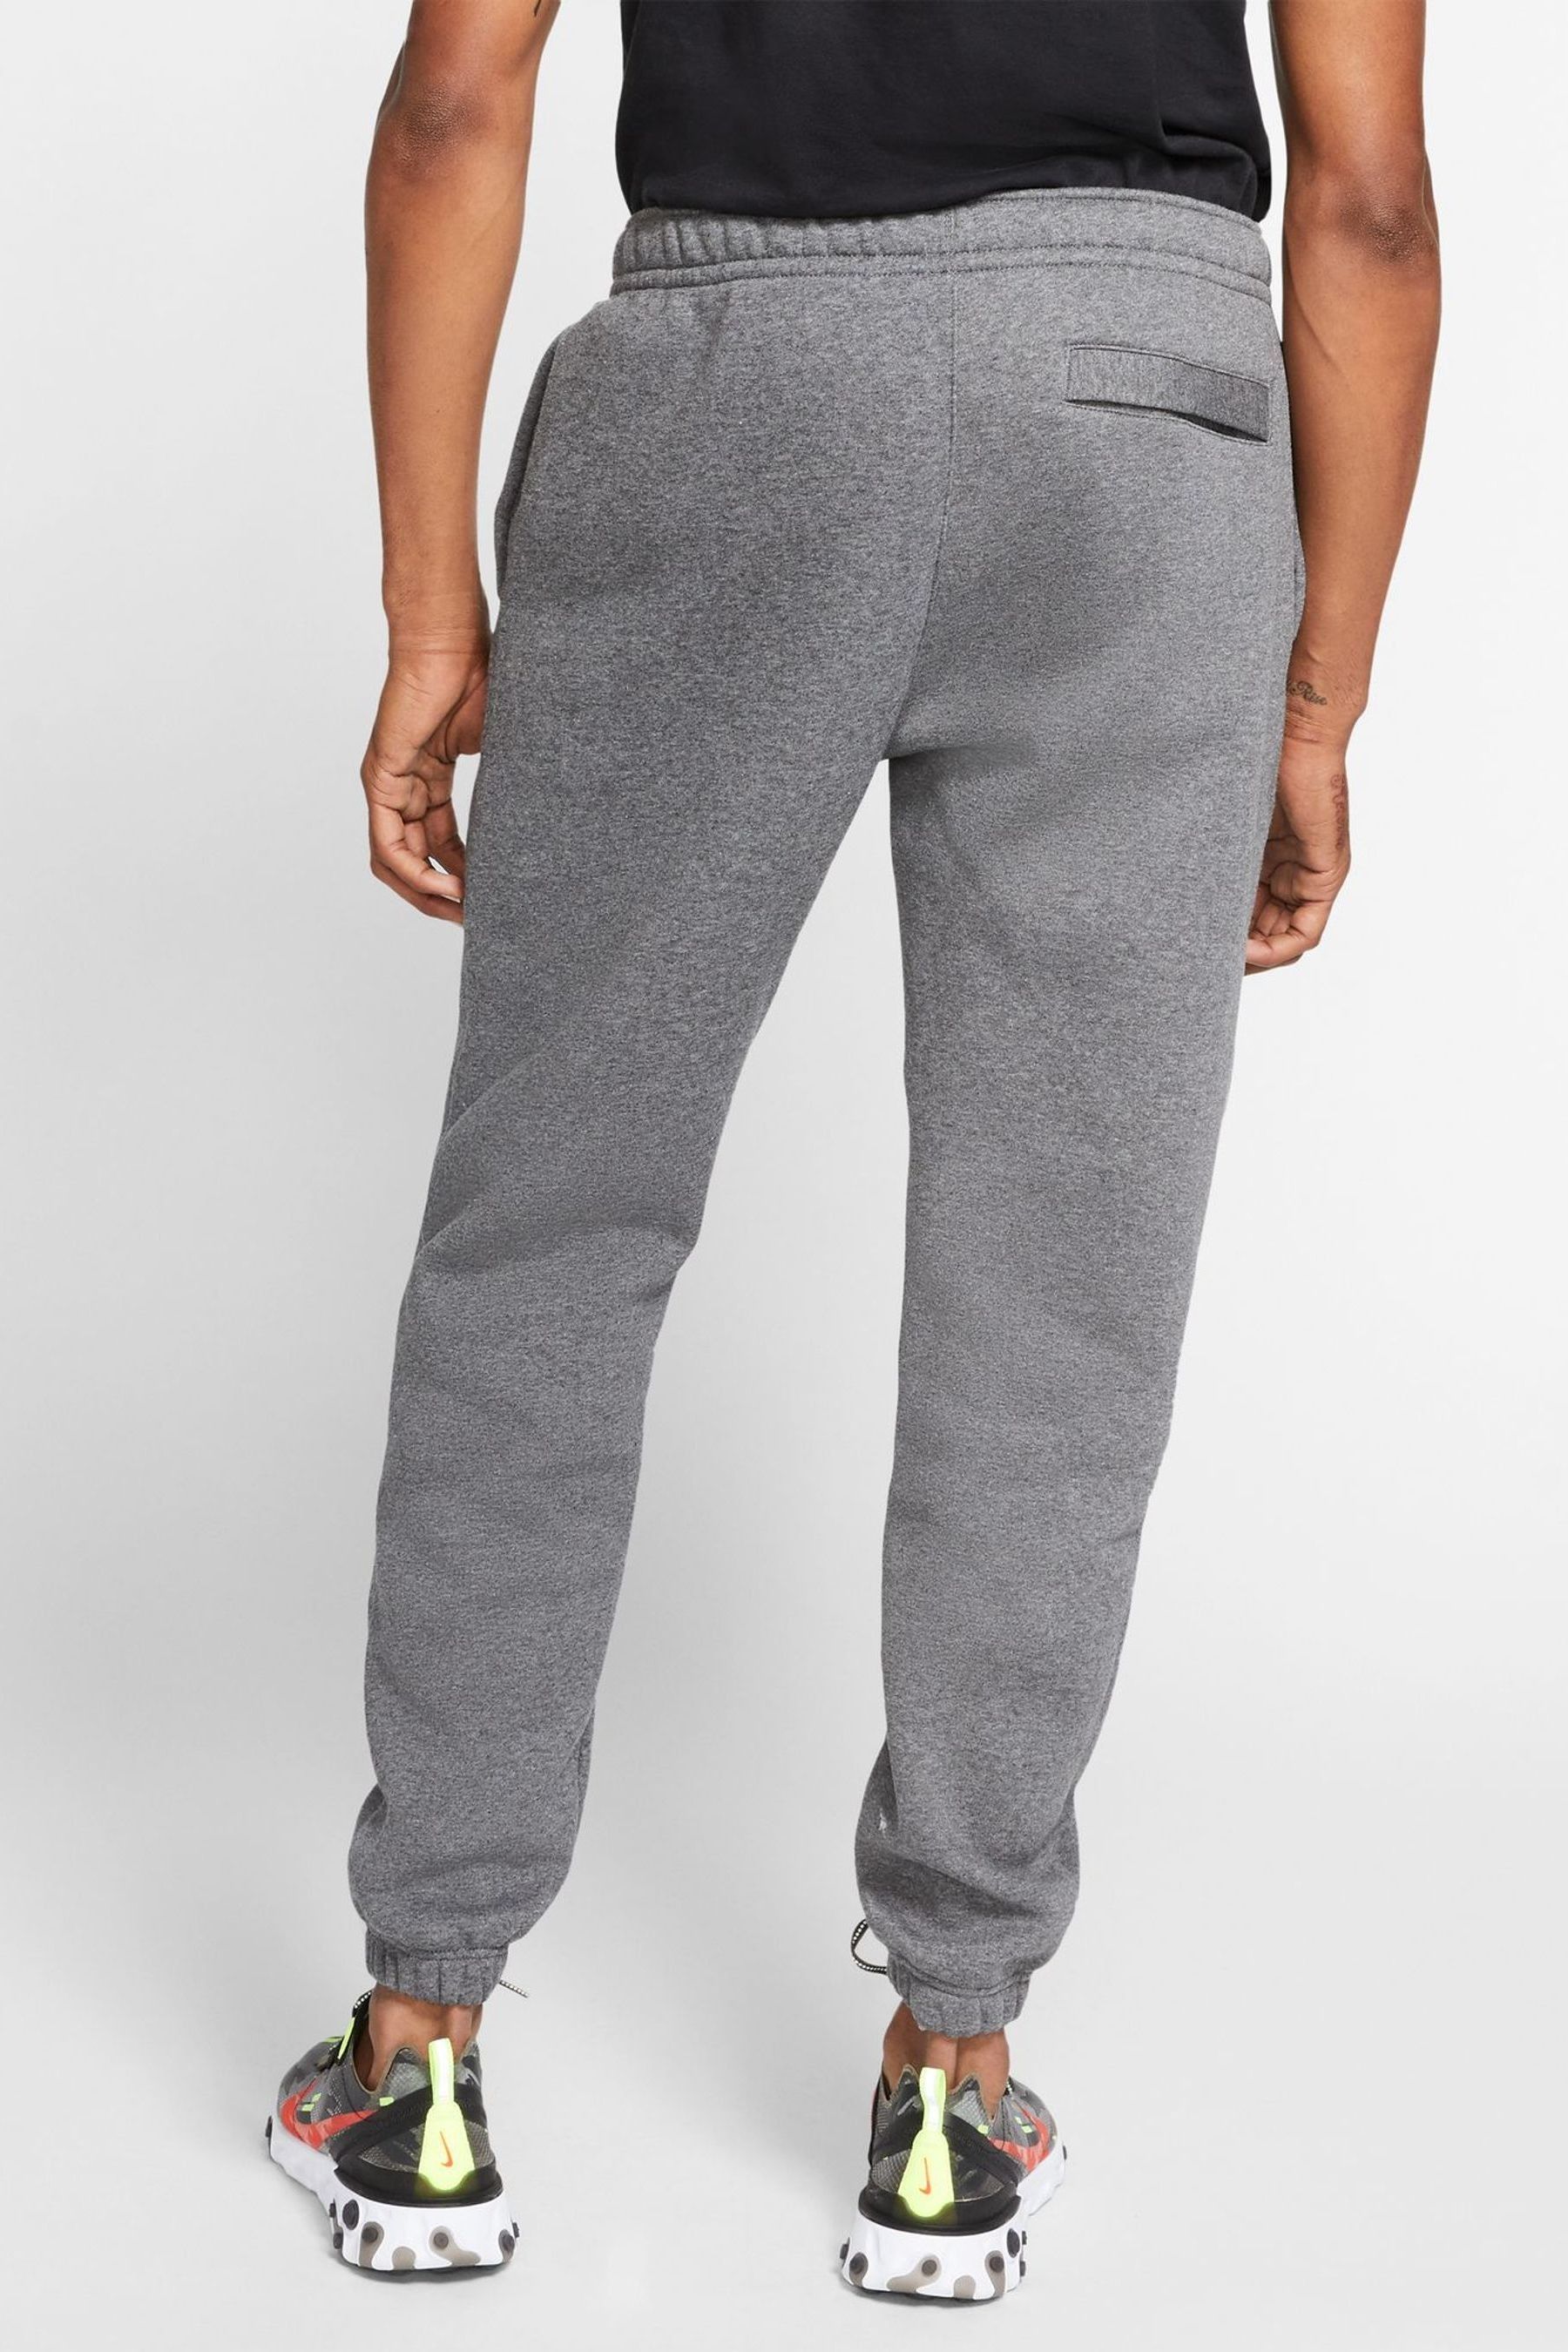 Buy Nike Charcoal Grey Club Cuffed Joggers from the Next UK online shop